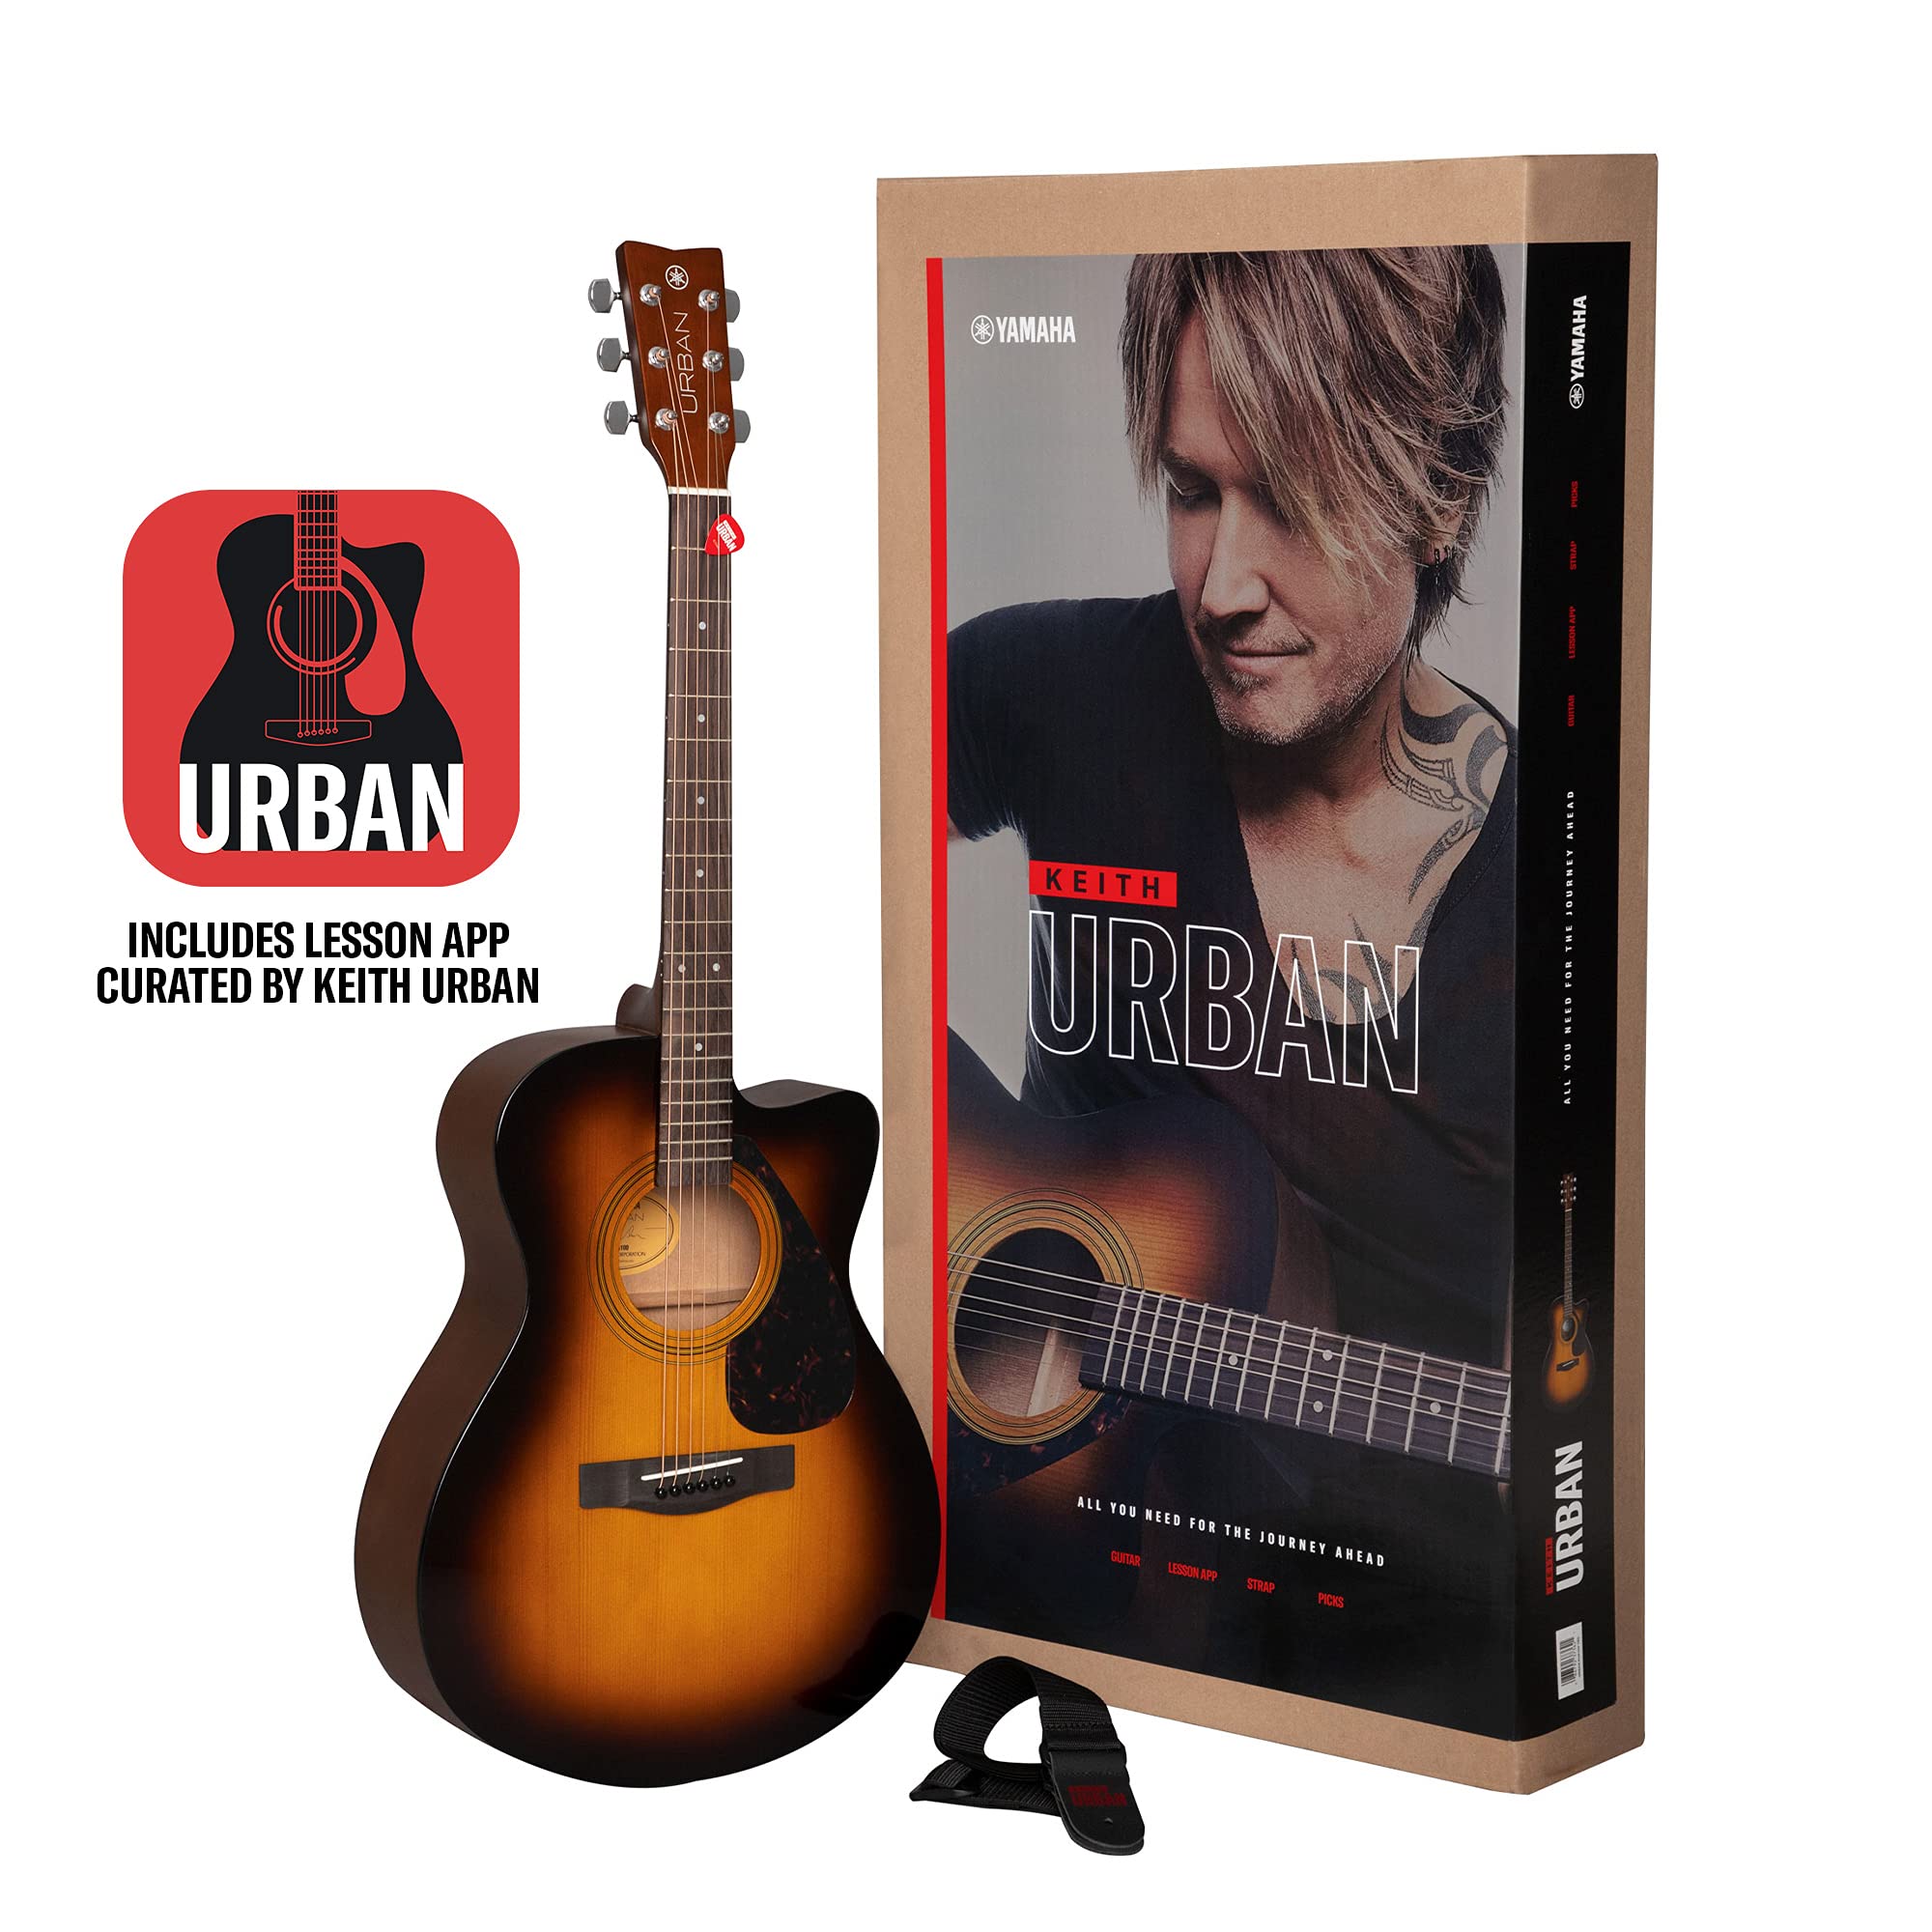 YAMAHA URBAN Guitar by  – Learn Guitar with Keith Urban - Guitar, App & Essential Accessories